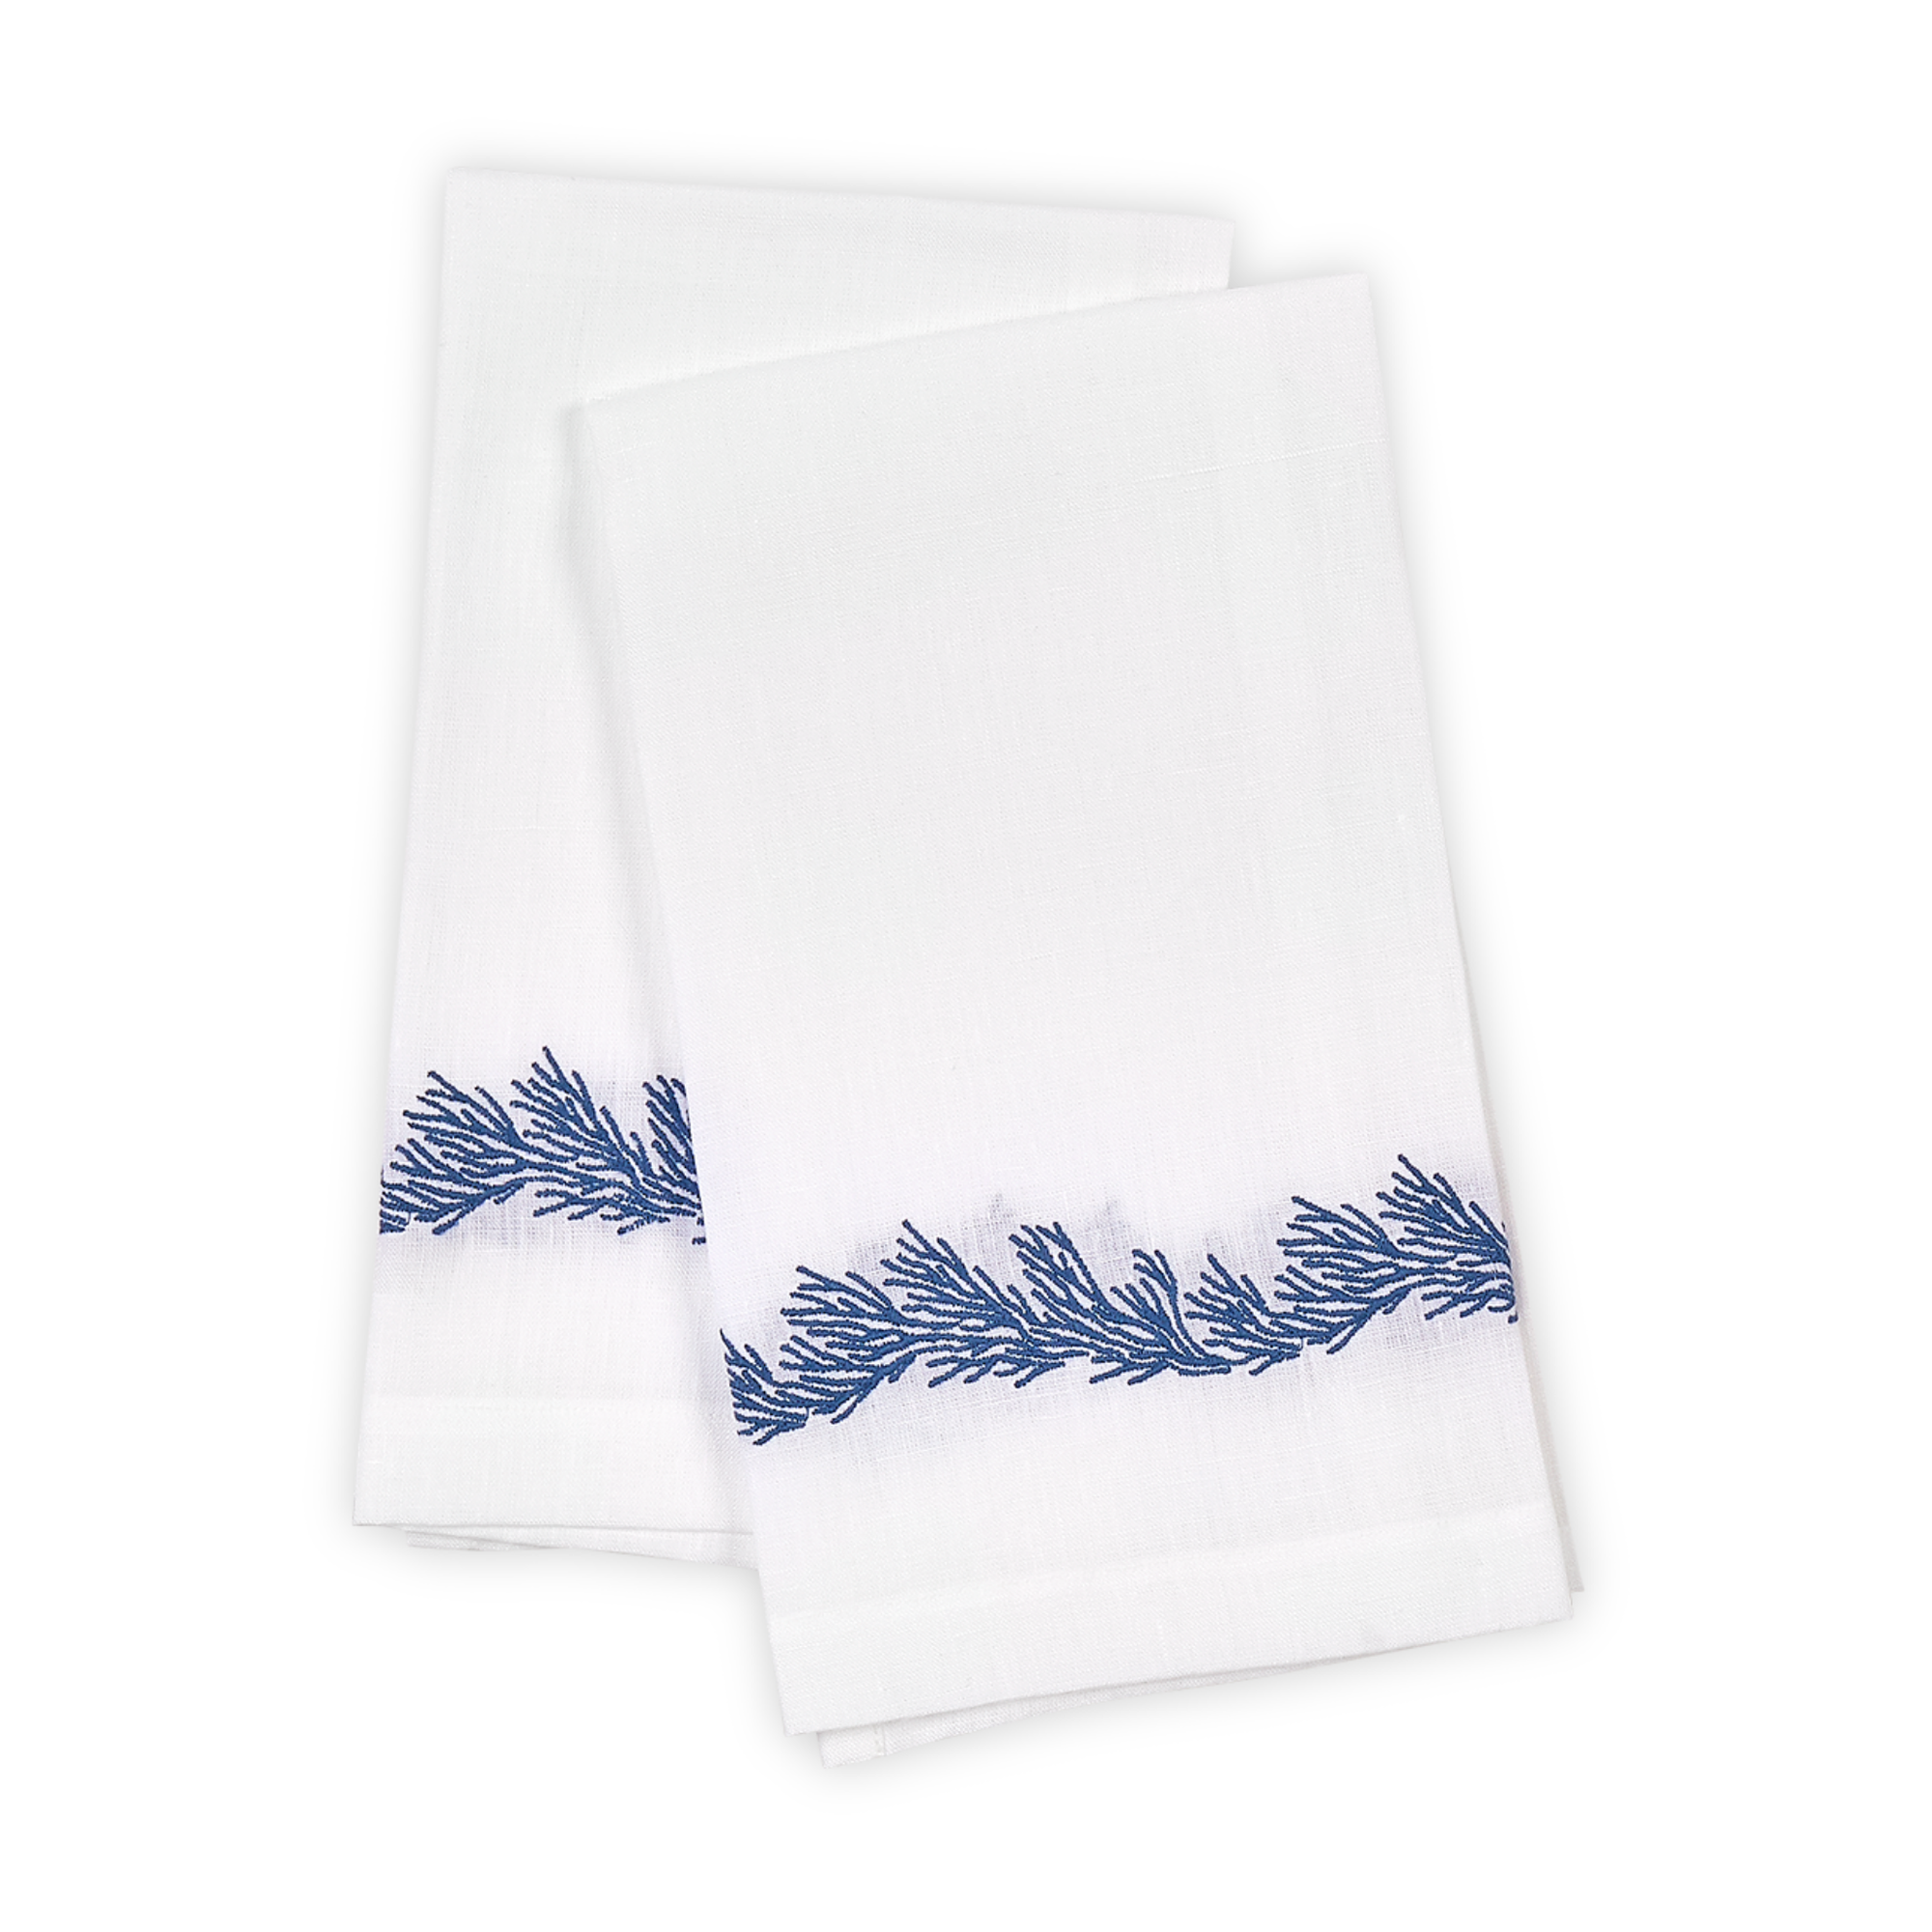 Set of 2 Folded Matouk Atoll Guest Towels in Baltic Color